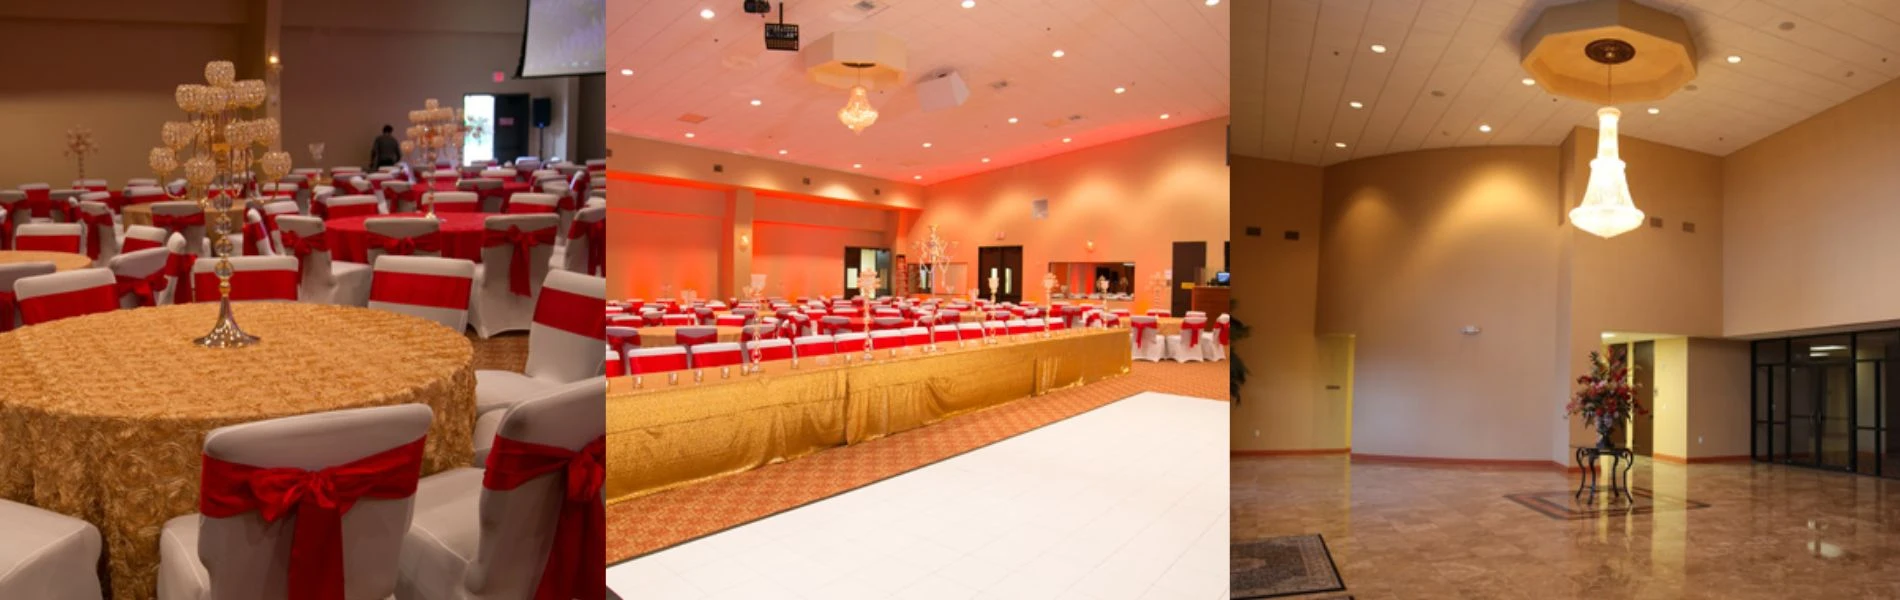 One of the best conference center and banquet hall